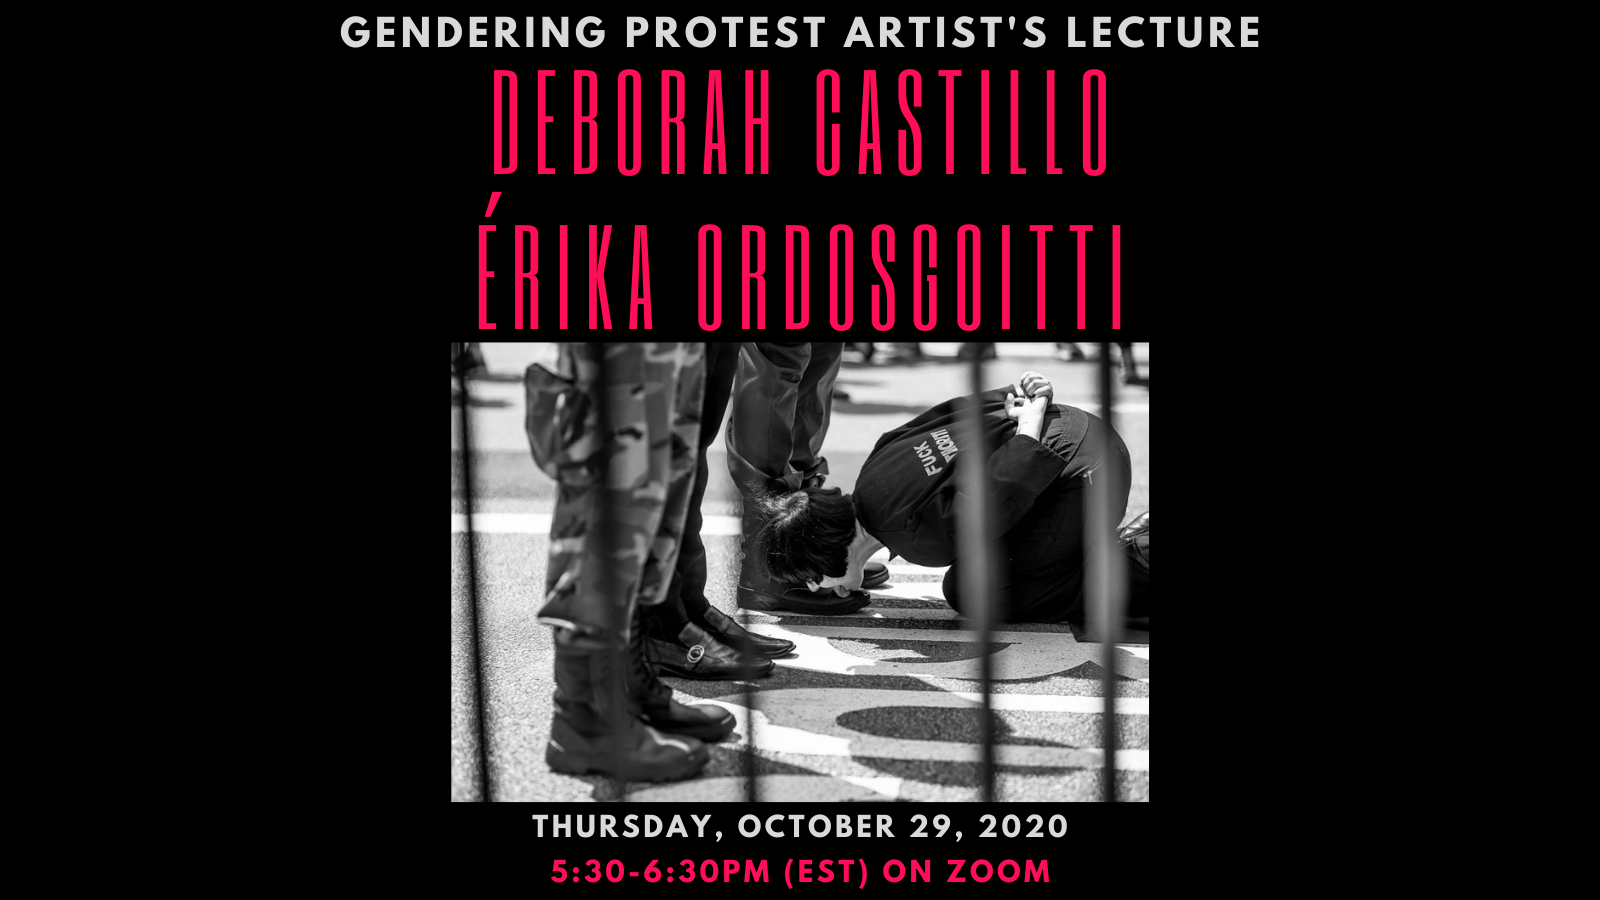 Gendering Protest Artist's Lecture invite with Black and white image of woman licking officers boots on a street.